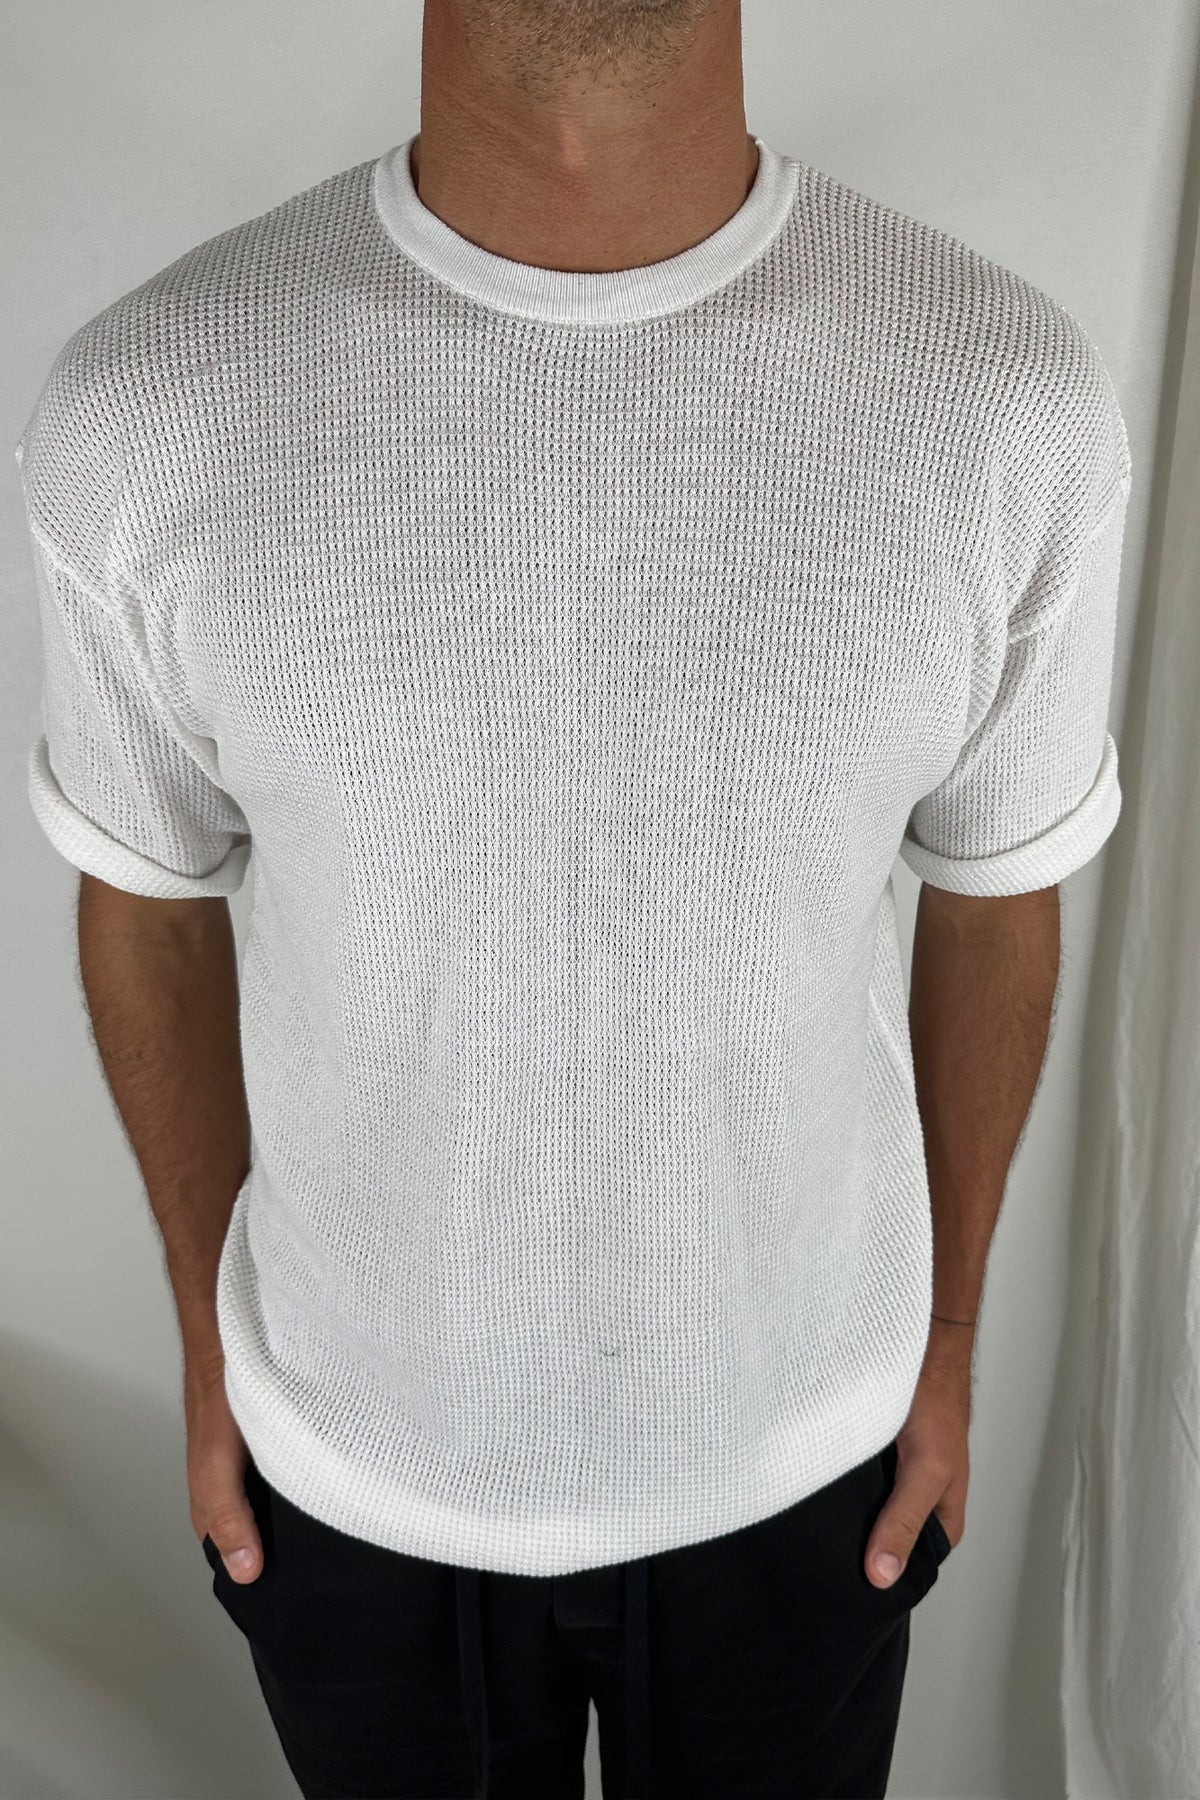 NTH Knitted Tee White - FINAL SALE